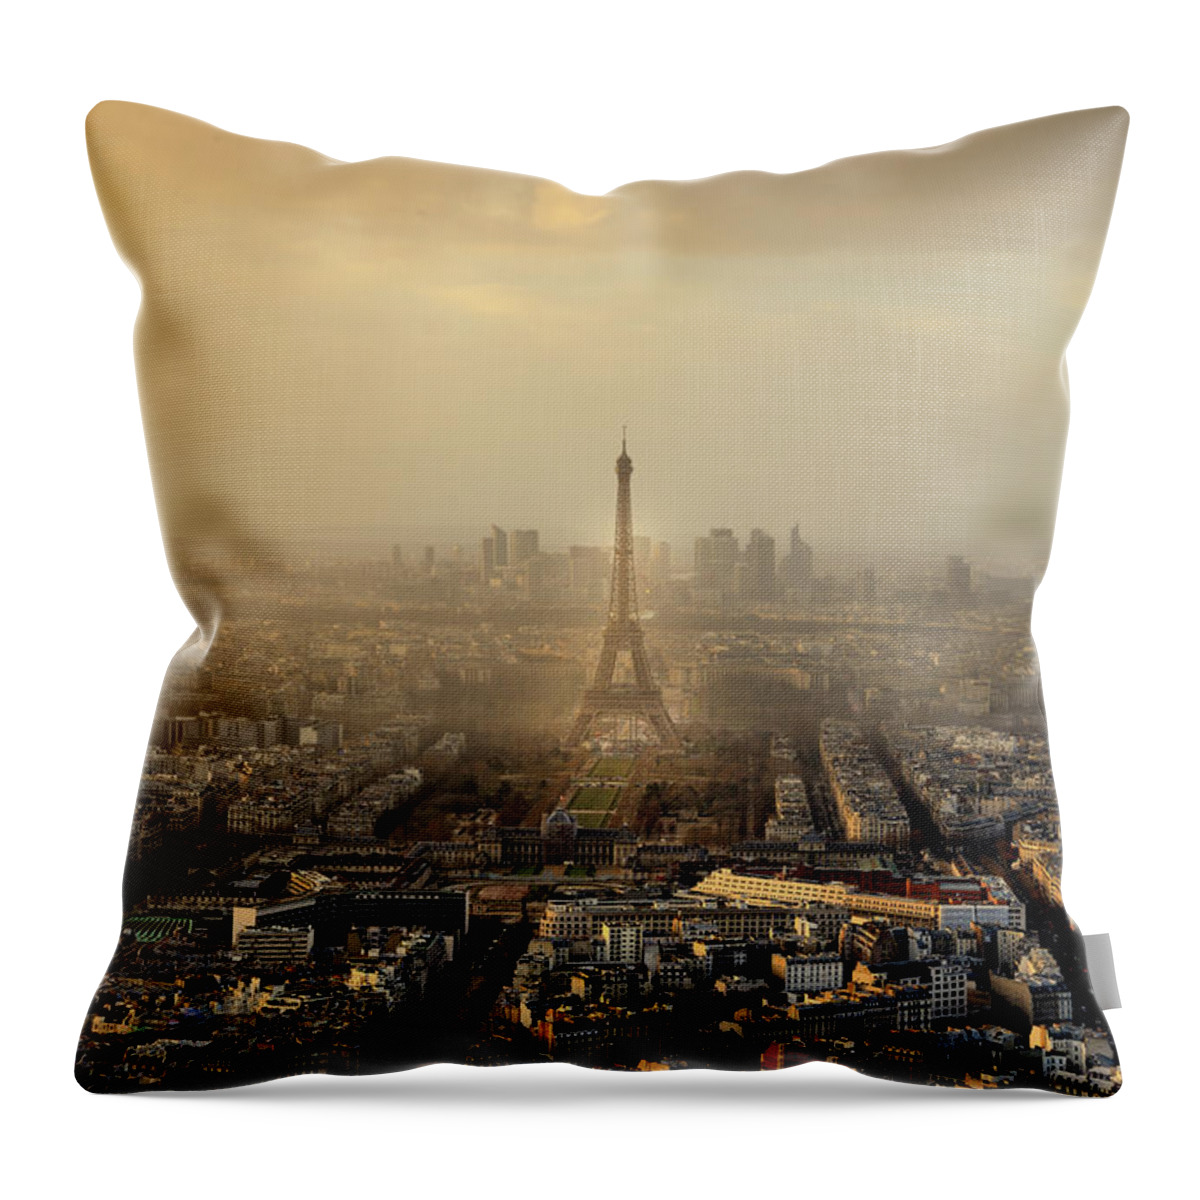 Eiffel Tower Throw Pillow featuring the photograph Aerial View Of Paris And Eiffel Tower by Martial Colomb